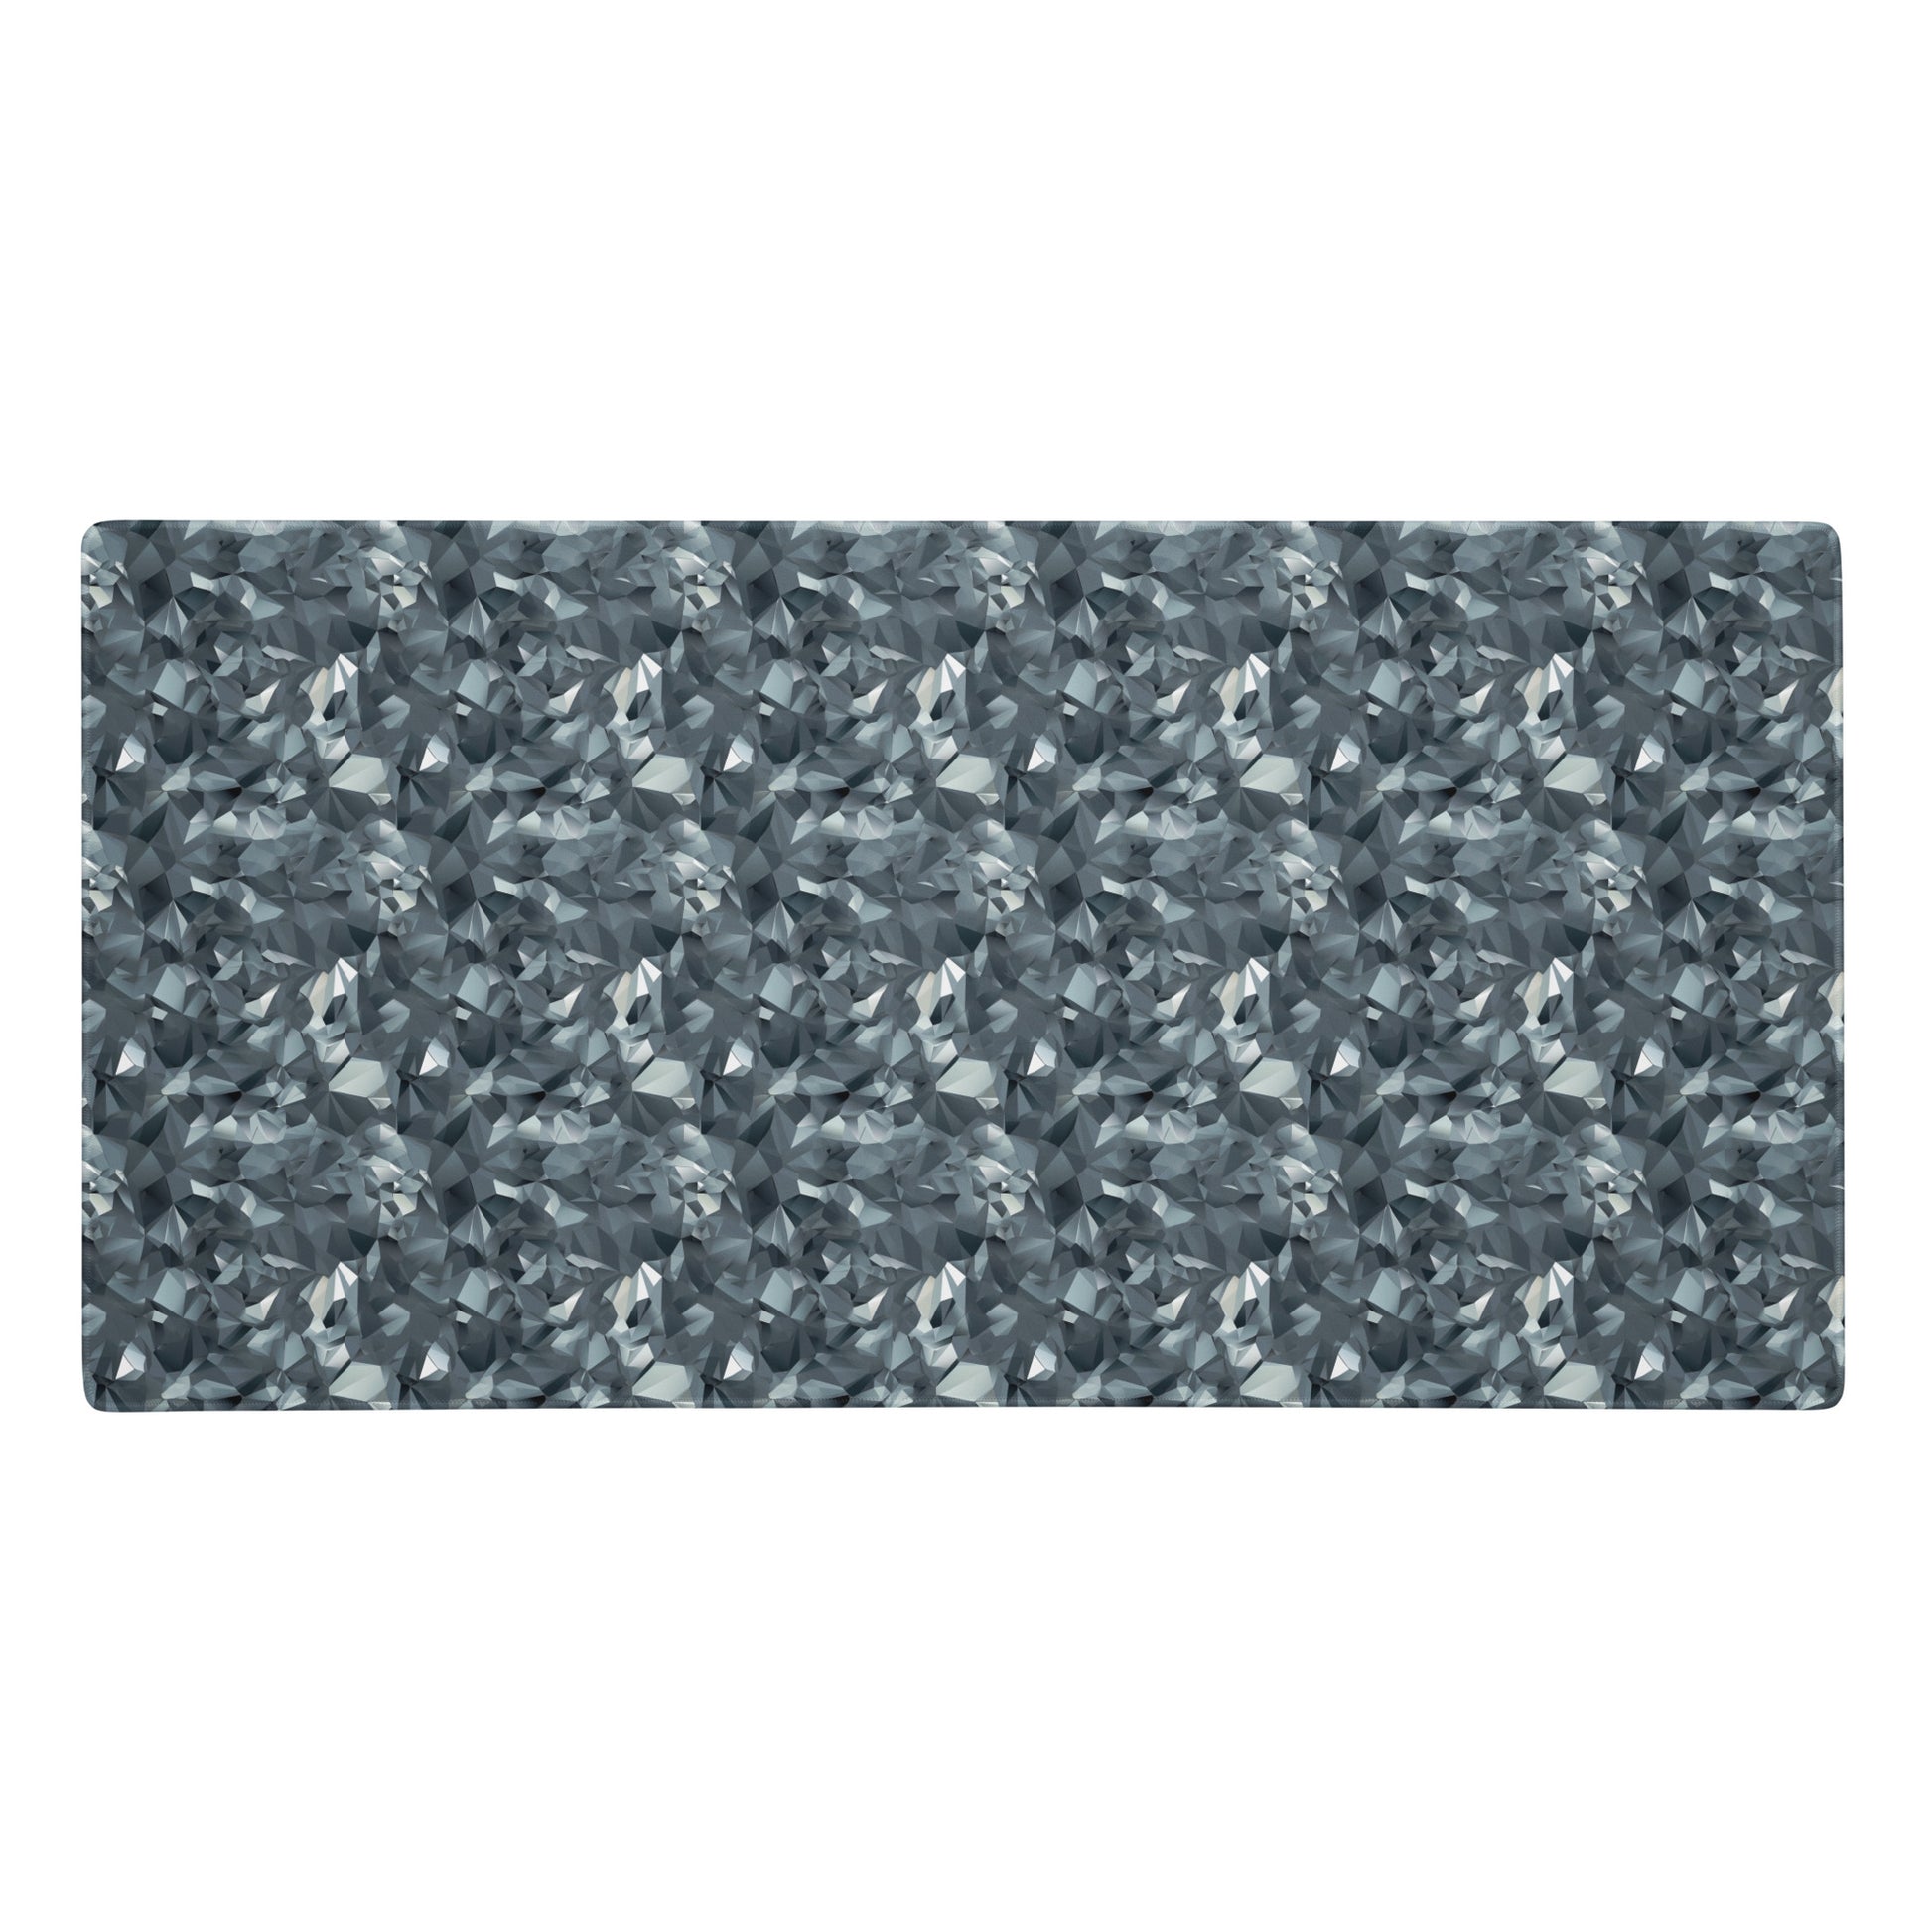 A 36" x 18" gaming desk pad with gray crystals.